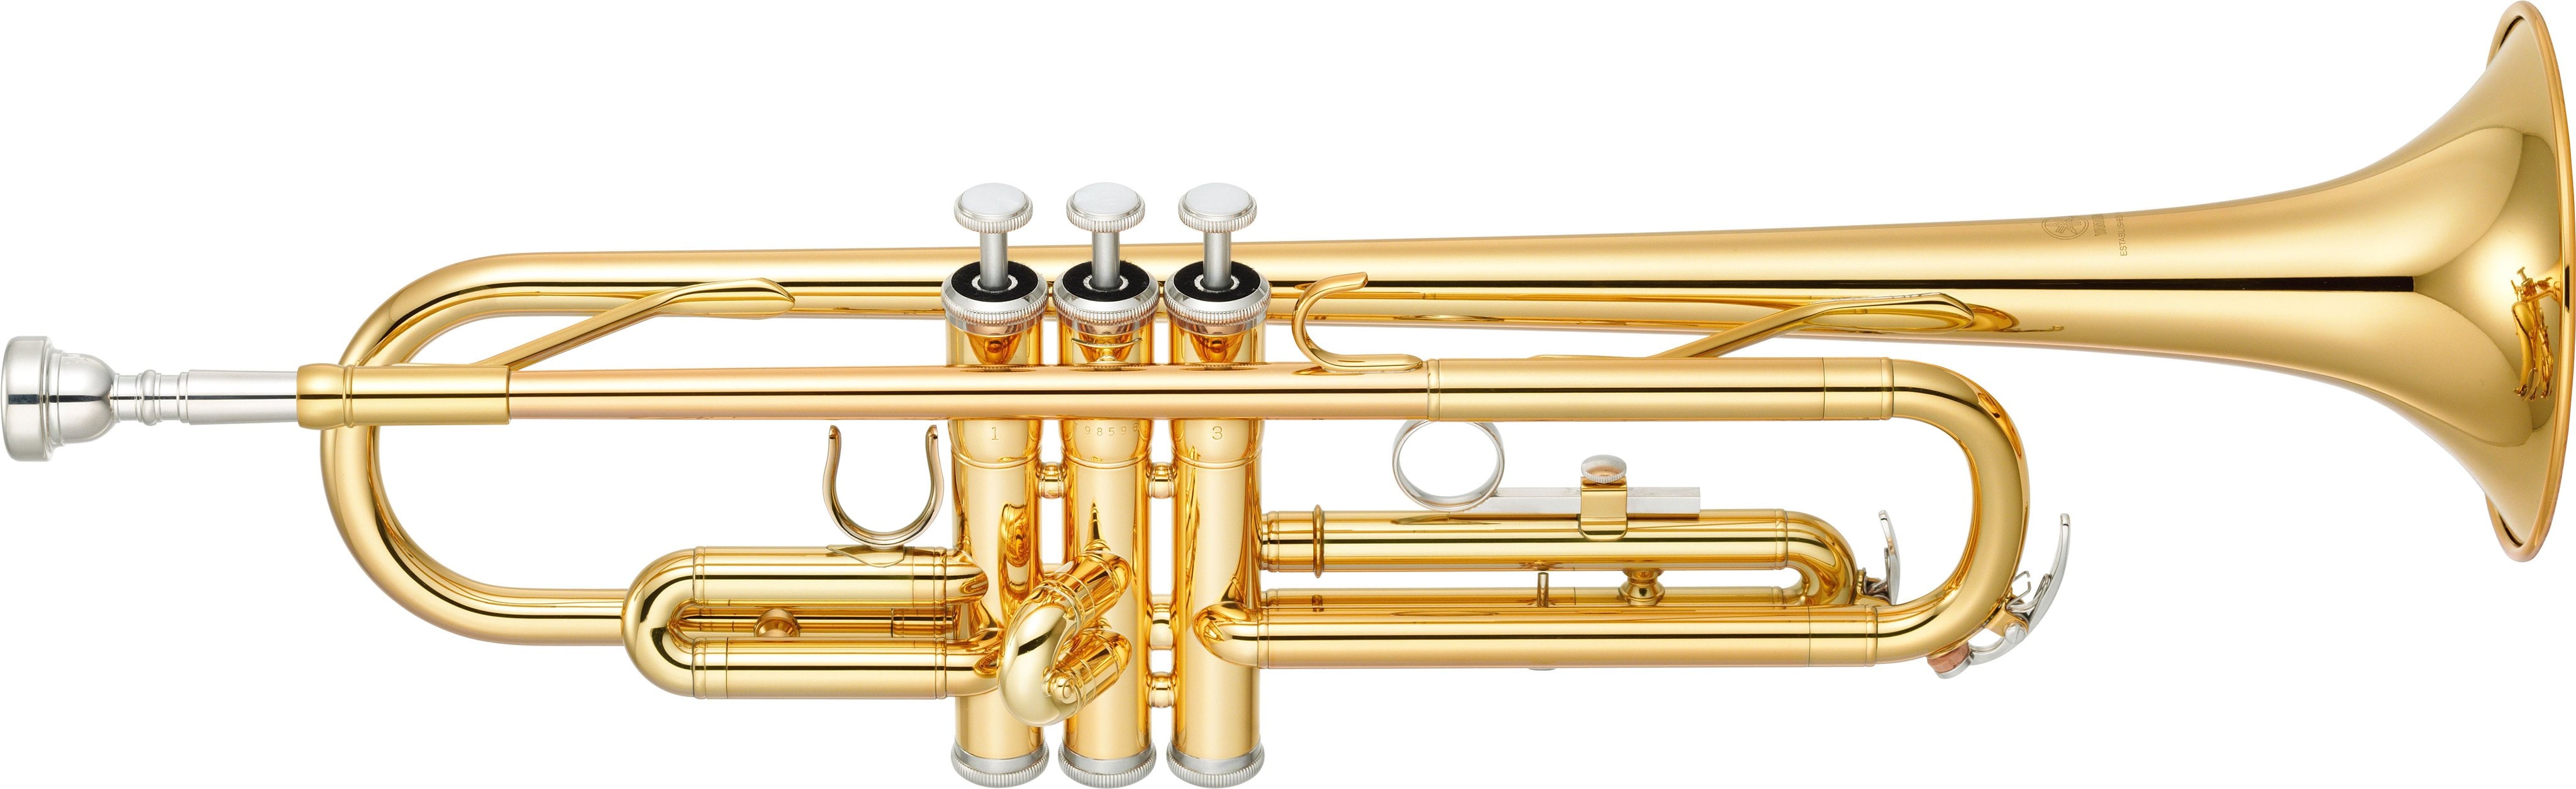 YTR-2330 - Overview - Bb Trumpets - Trumpets - Brass  Woodwinds - Musical  Instruments - Products - Yamaha - United States